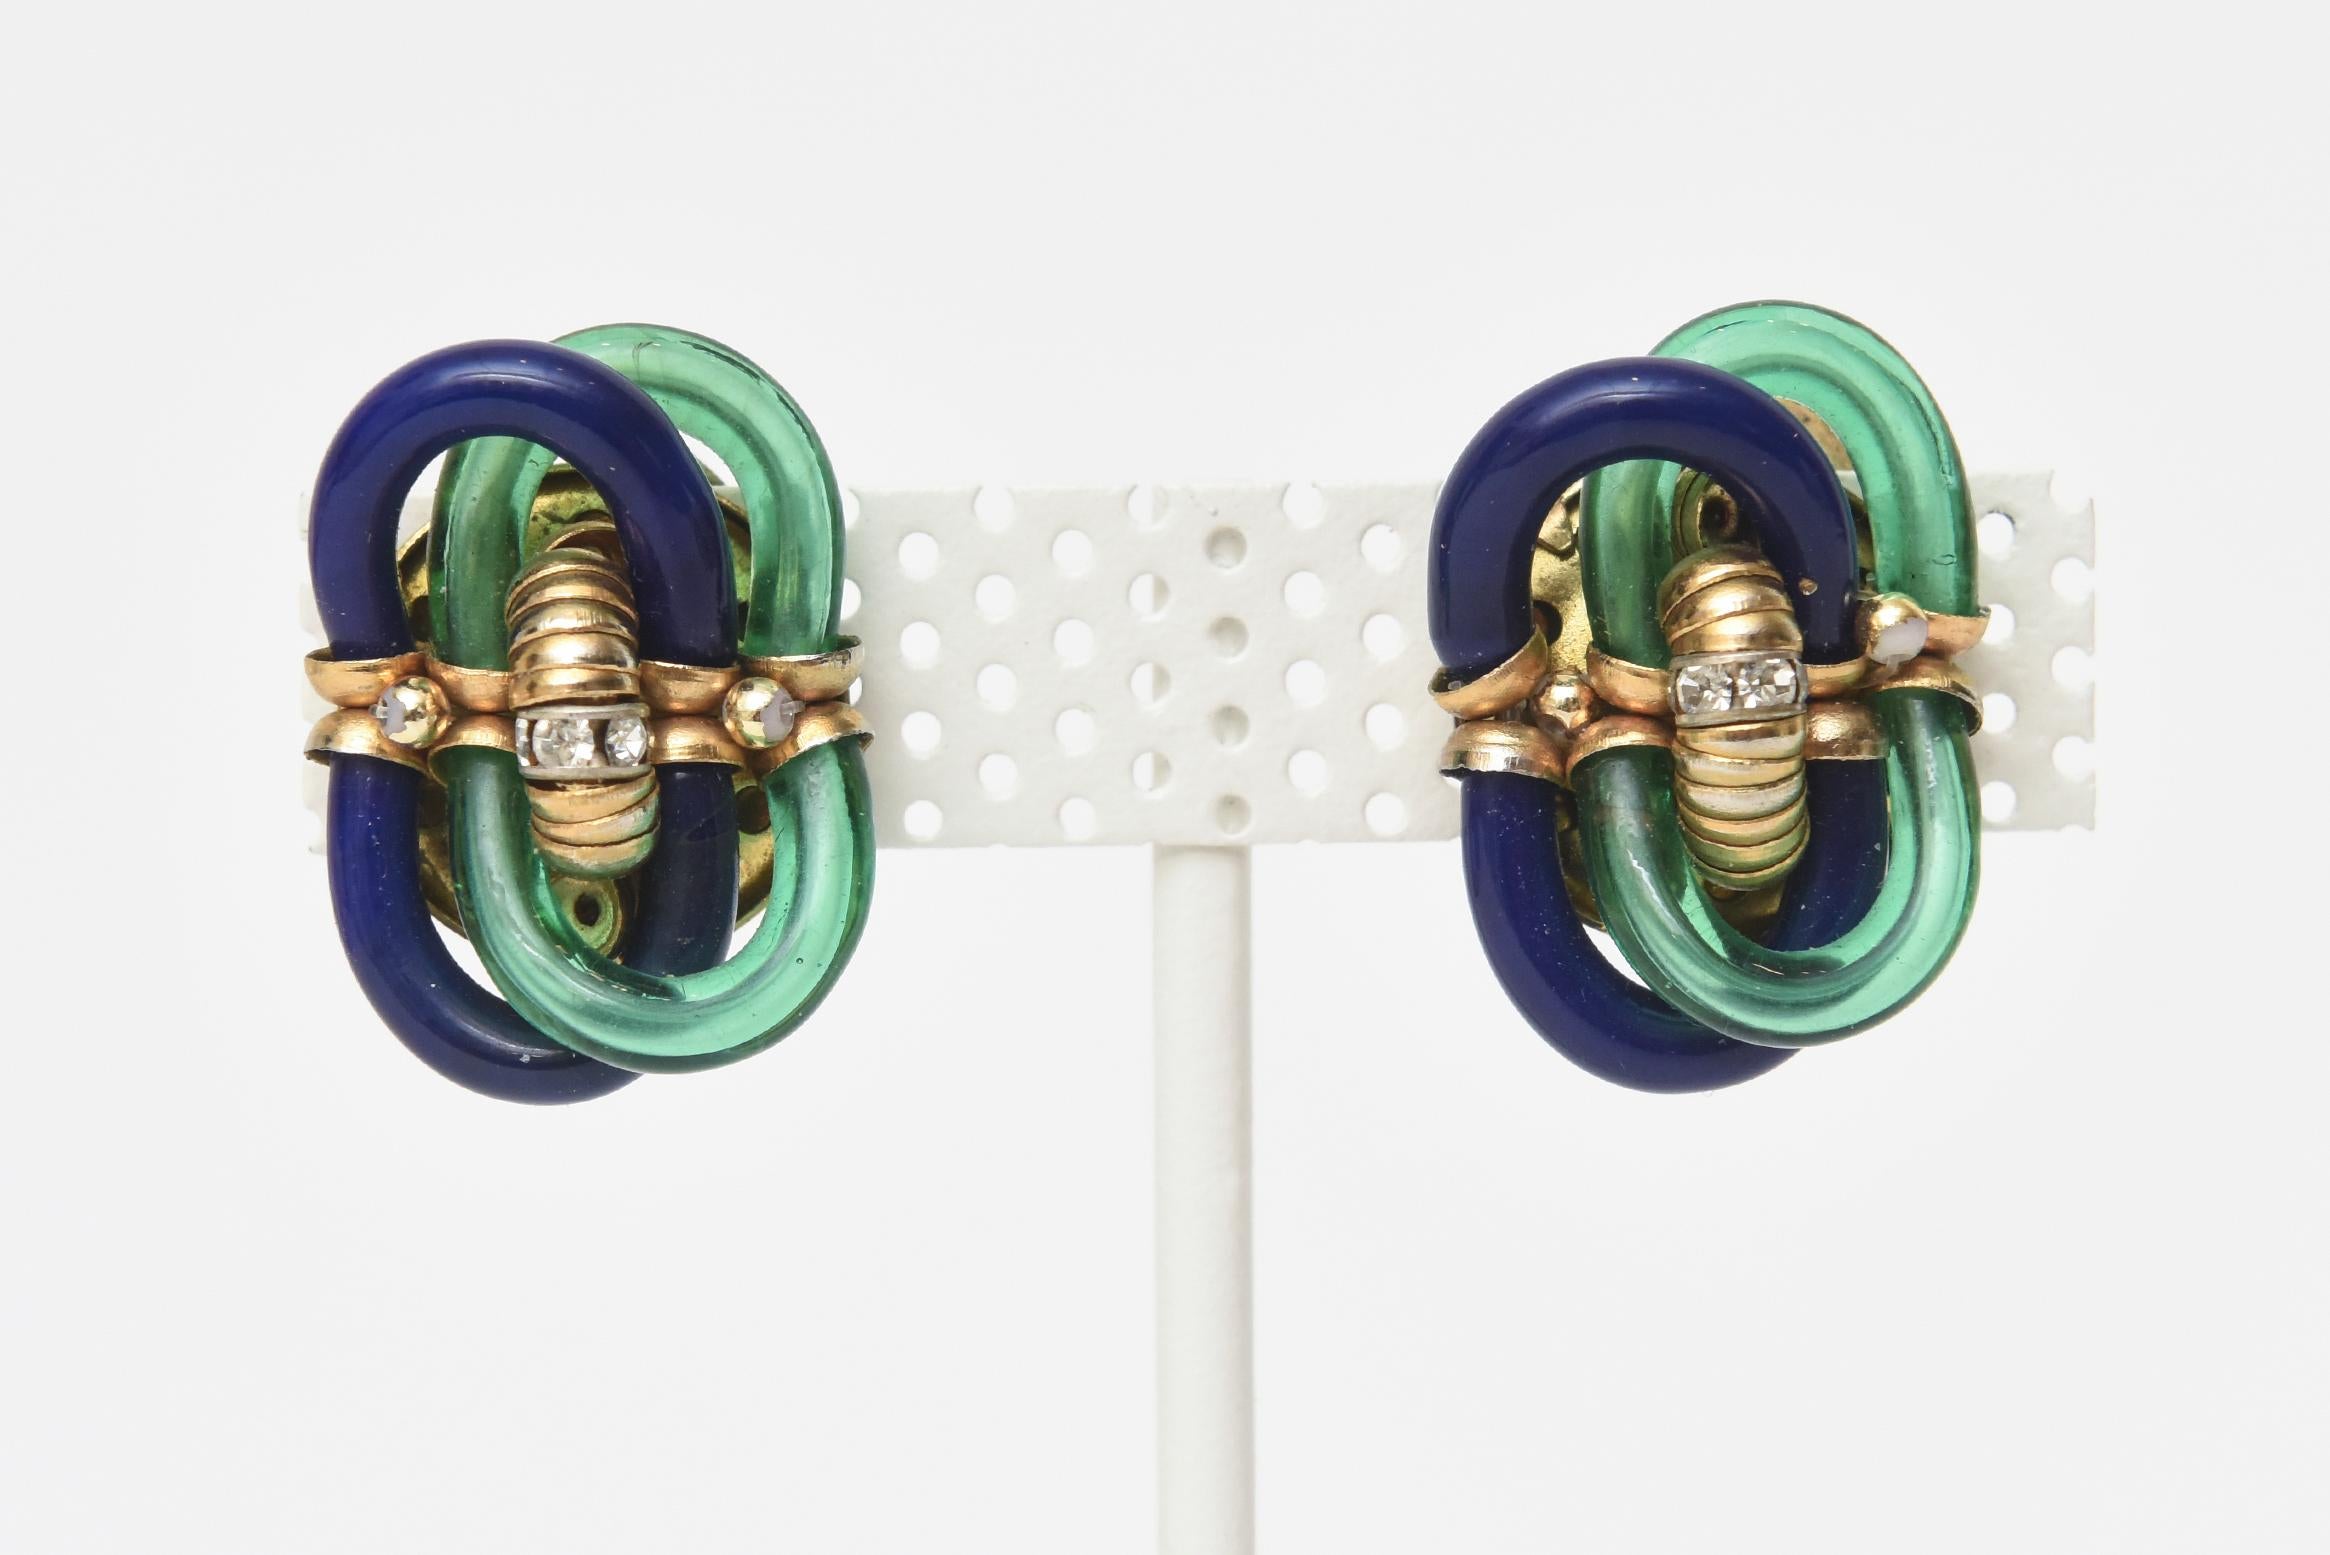 This lovely pair of very early vintage clip on Chanel earrings are the dual collaboration of the Italian master glass artist: Seguso and Chanel. They are very early from the 50's or 60's. The luminous twisted blue and green glass is set against